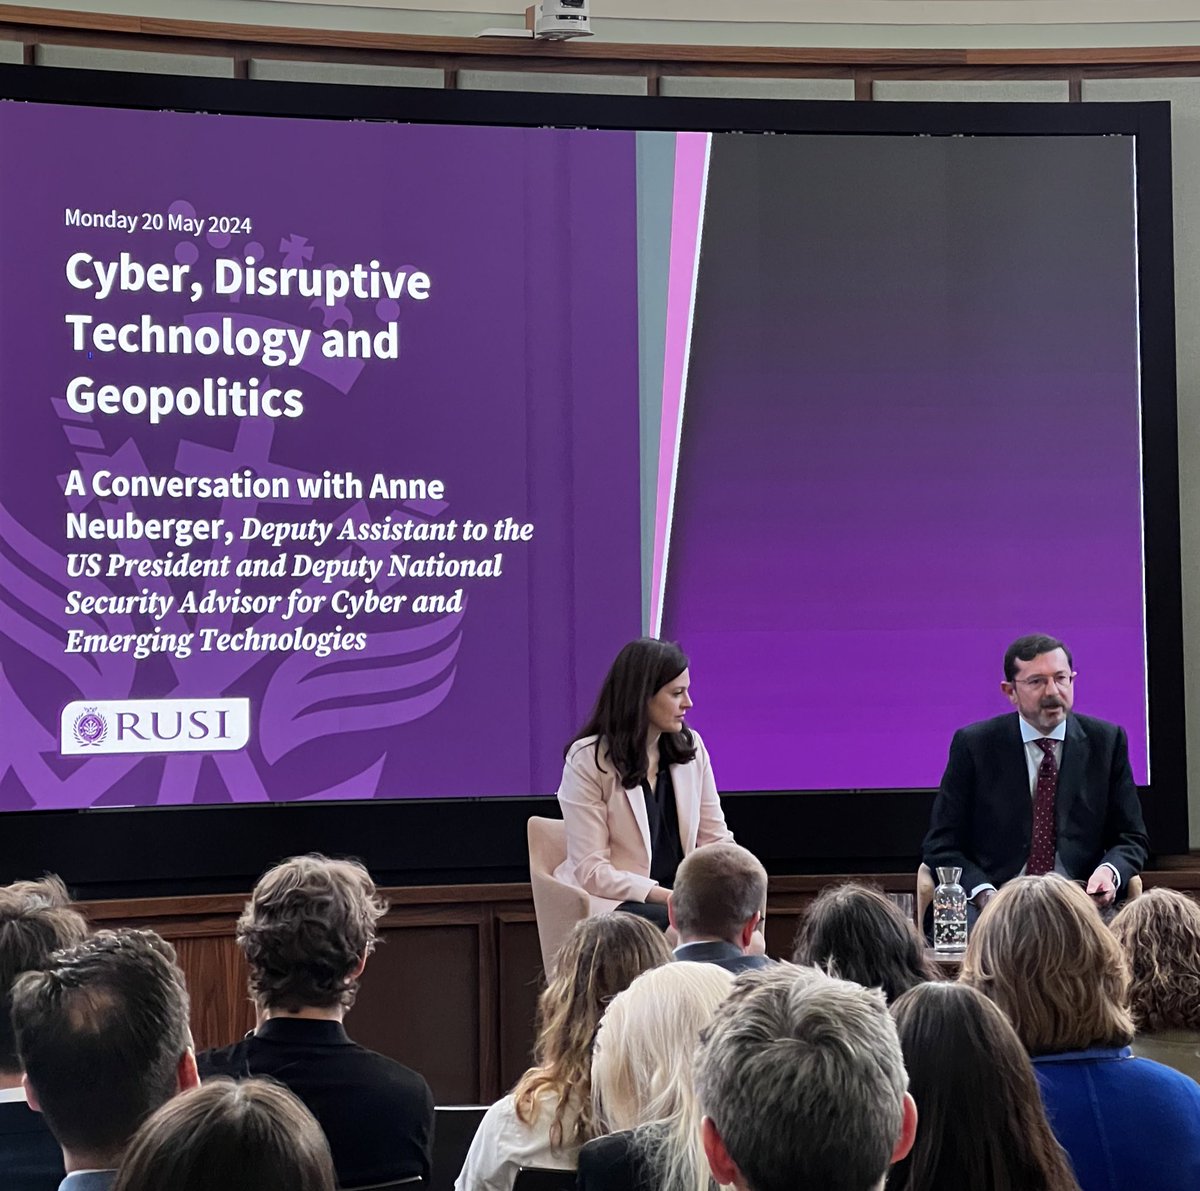 Anne Neuberger, Deputy Assistant to the US President and Deputy Nat Sec Advisor for Cyber and Emerging tech joins us at @RUSI_org today to reflect on the US approach/responses to cyber threats. Ransomware, prepositioning from China-based threat actors, intl cooperation and more.